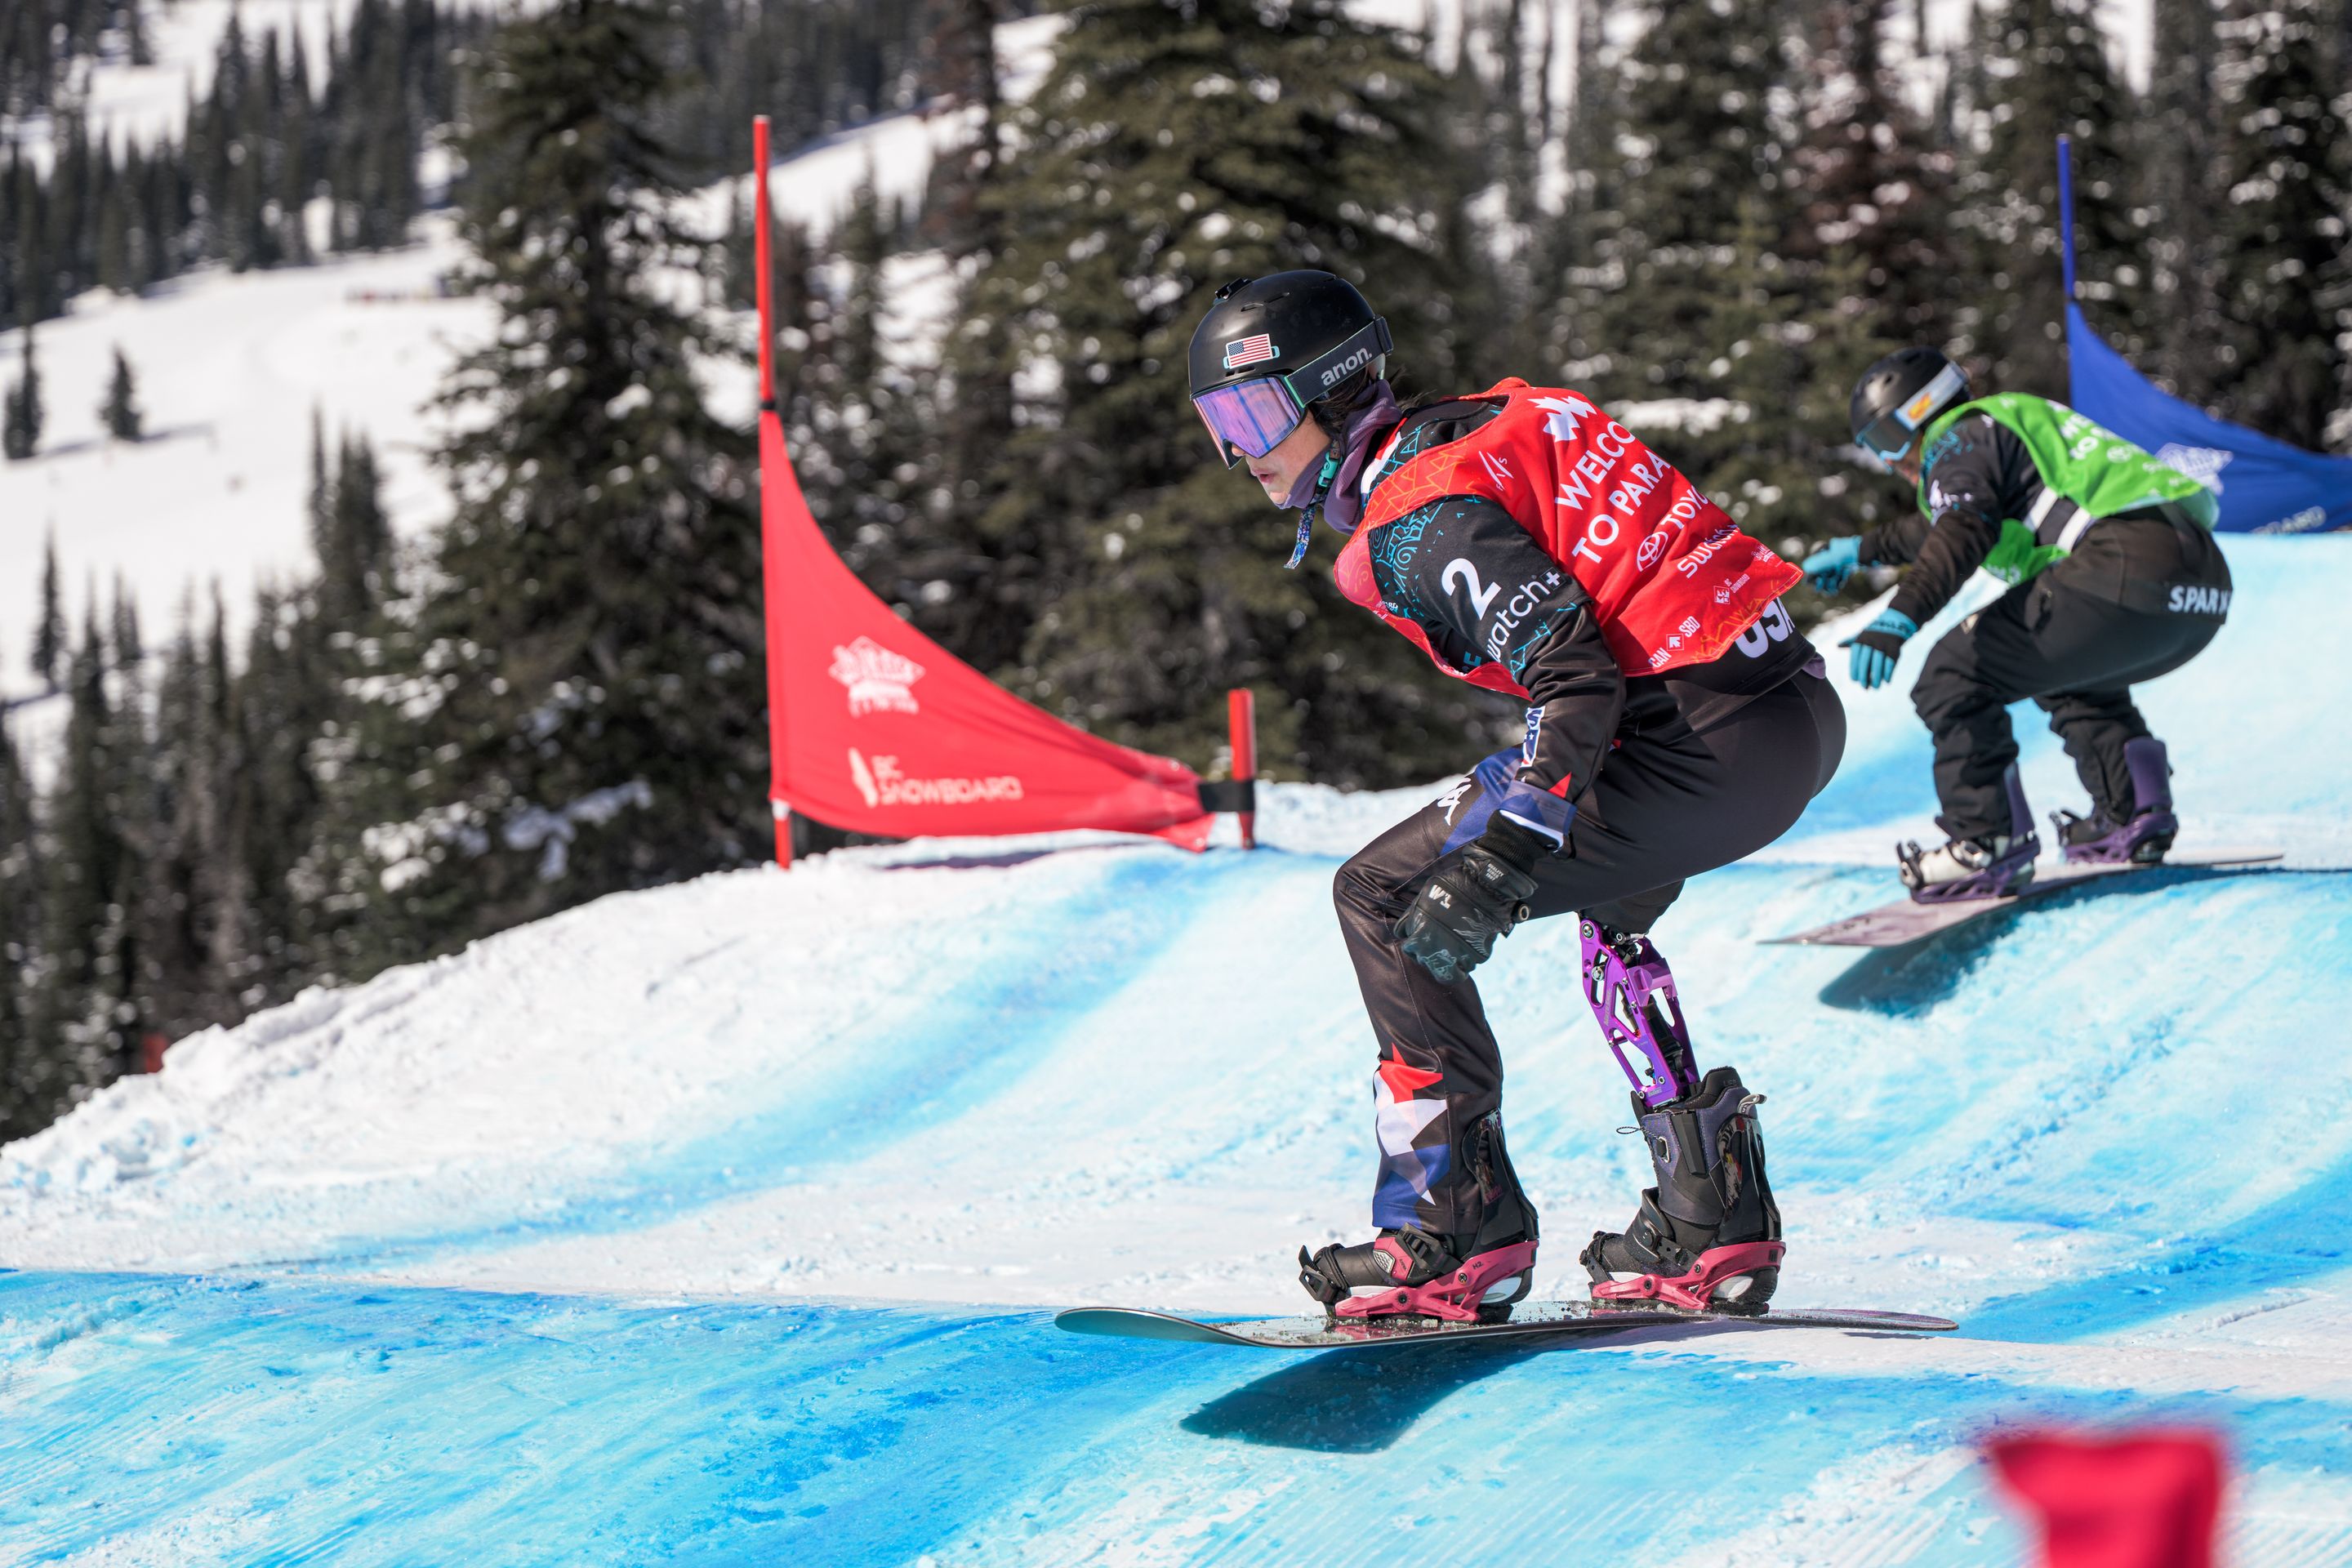 Brenna Huckaby Clegg (USA) on a wave of the second Snowboard Cross in Big White (CAN)